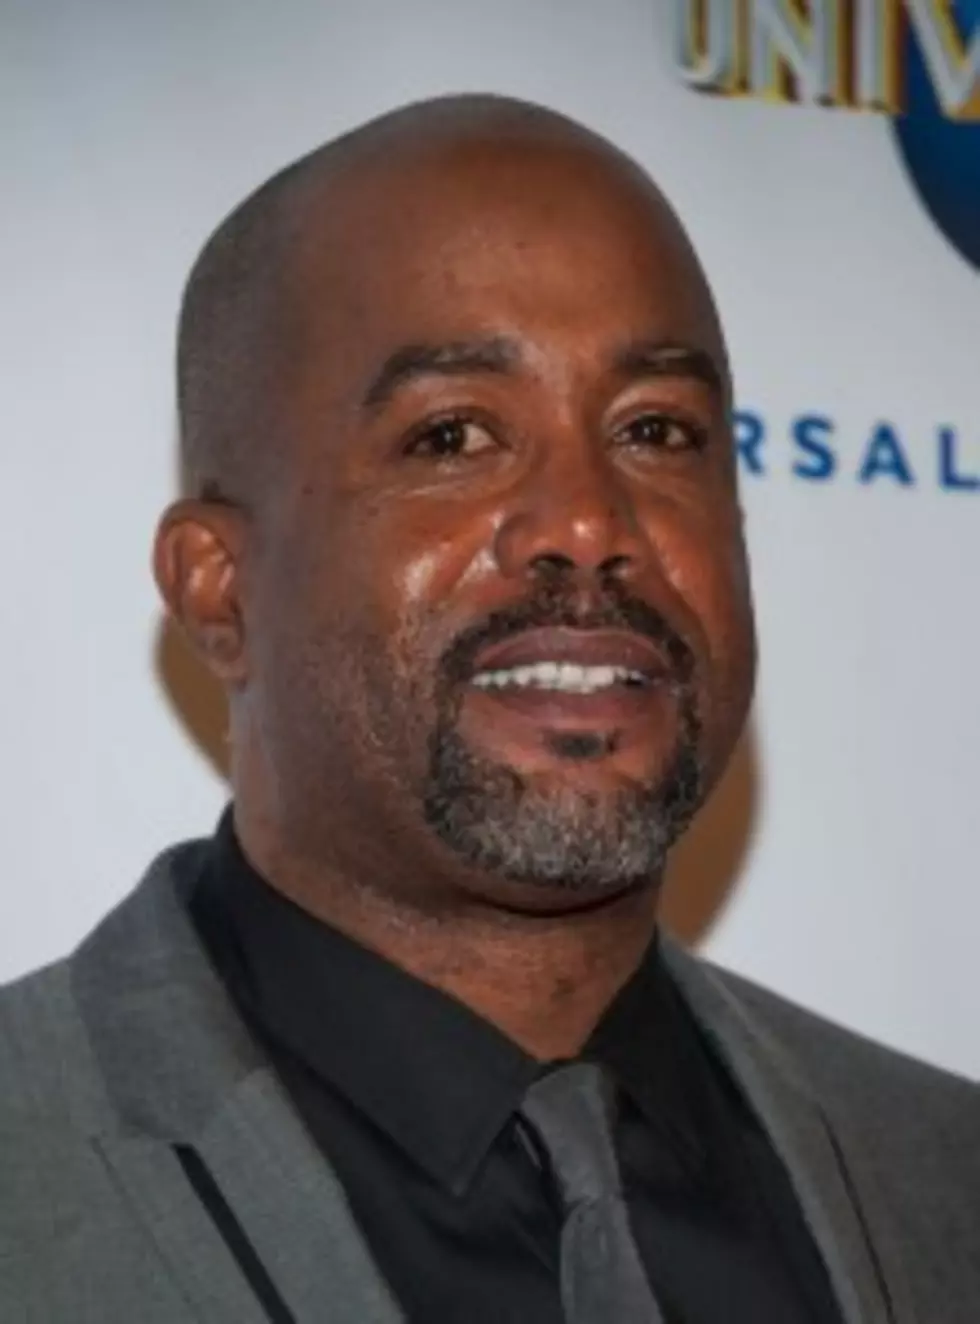 Both Darius Rucker and Chris Daughtry to sing national anthem at Final Four